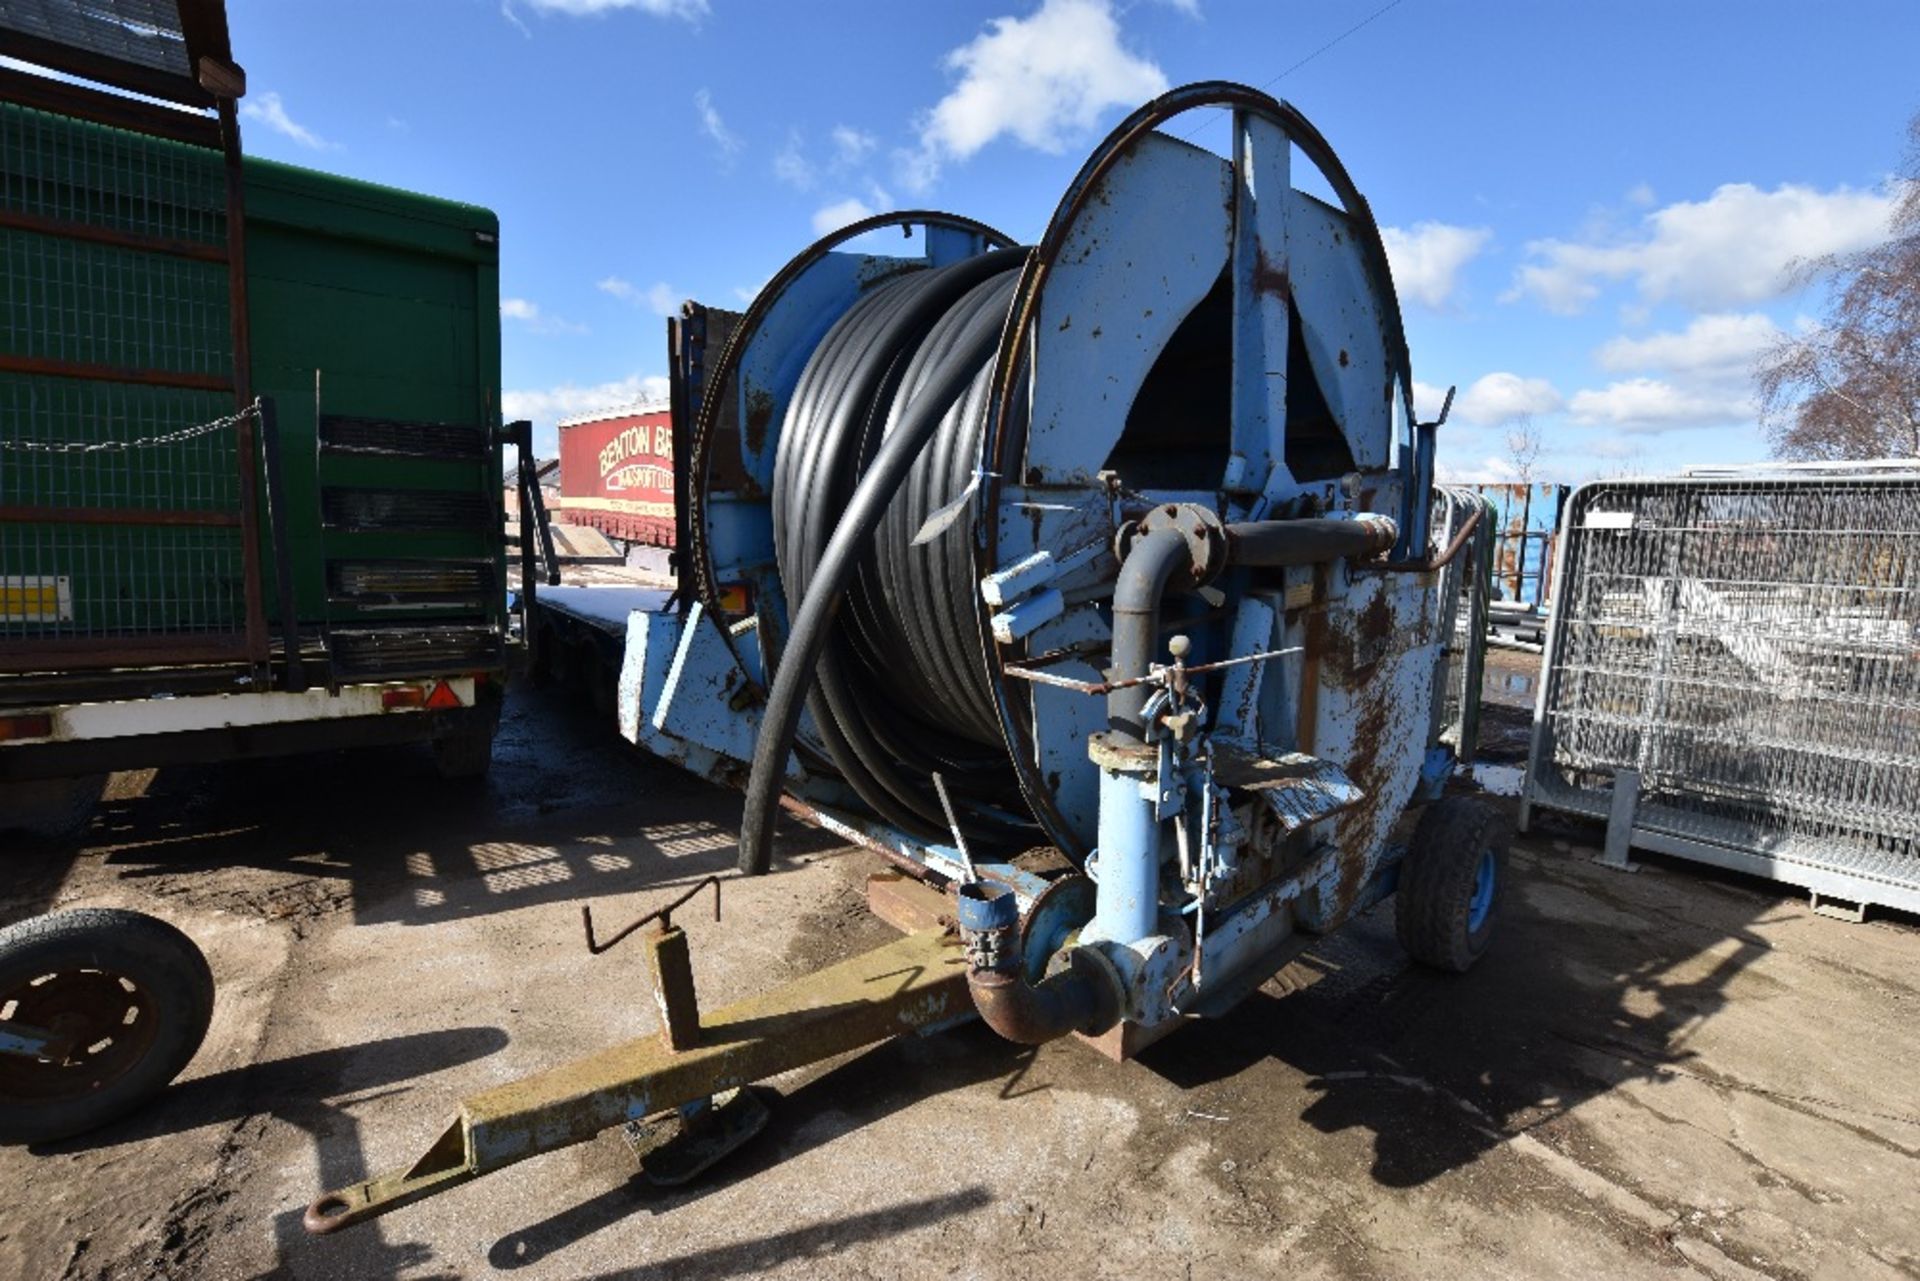 Wright Rain WV83/350 Type 7034472 Irrigation Reel Trailer c/w Pipe (approx. 80-100m), Serial No: